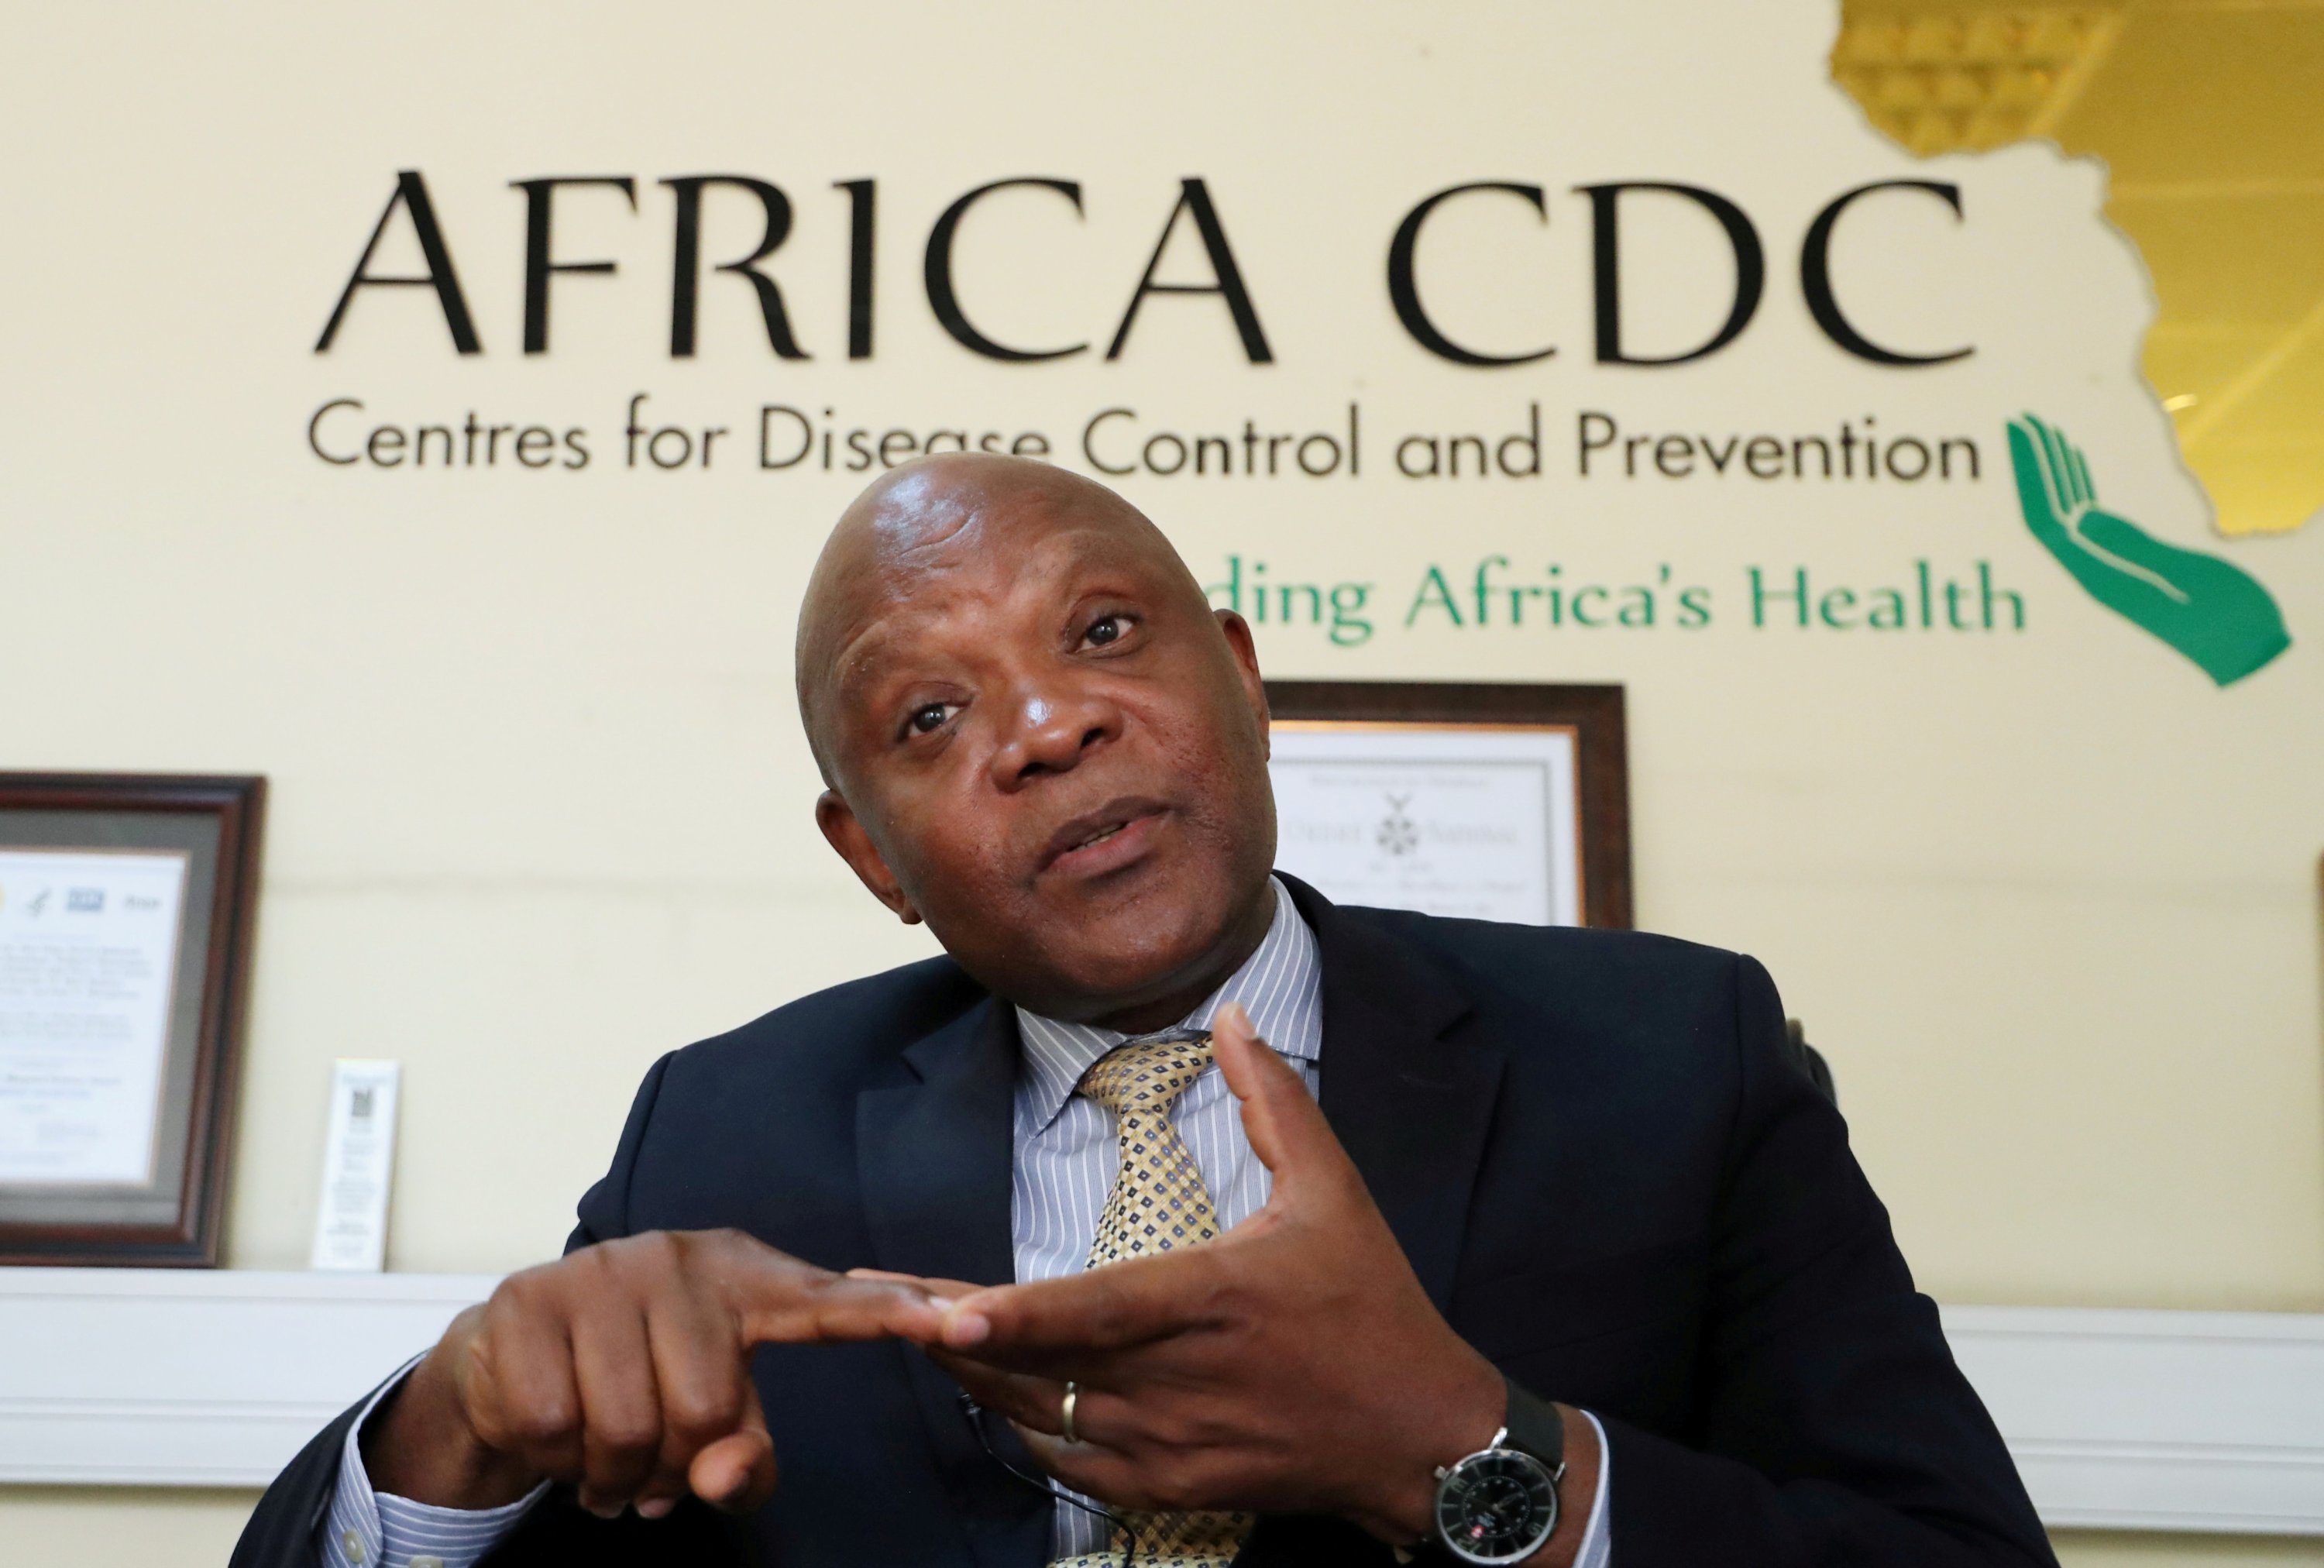 John Nkengasong, Africa's Director of the Centers for Disease Control (CDC), speaks during an interview with Reuters at the African Union (AU) Headquarters in Addis Ababa, Ethiopia, March 11, 2020. (Reuters Photo)